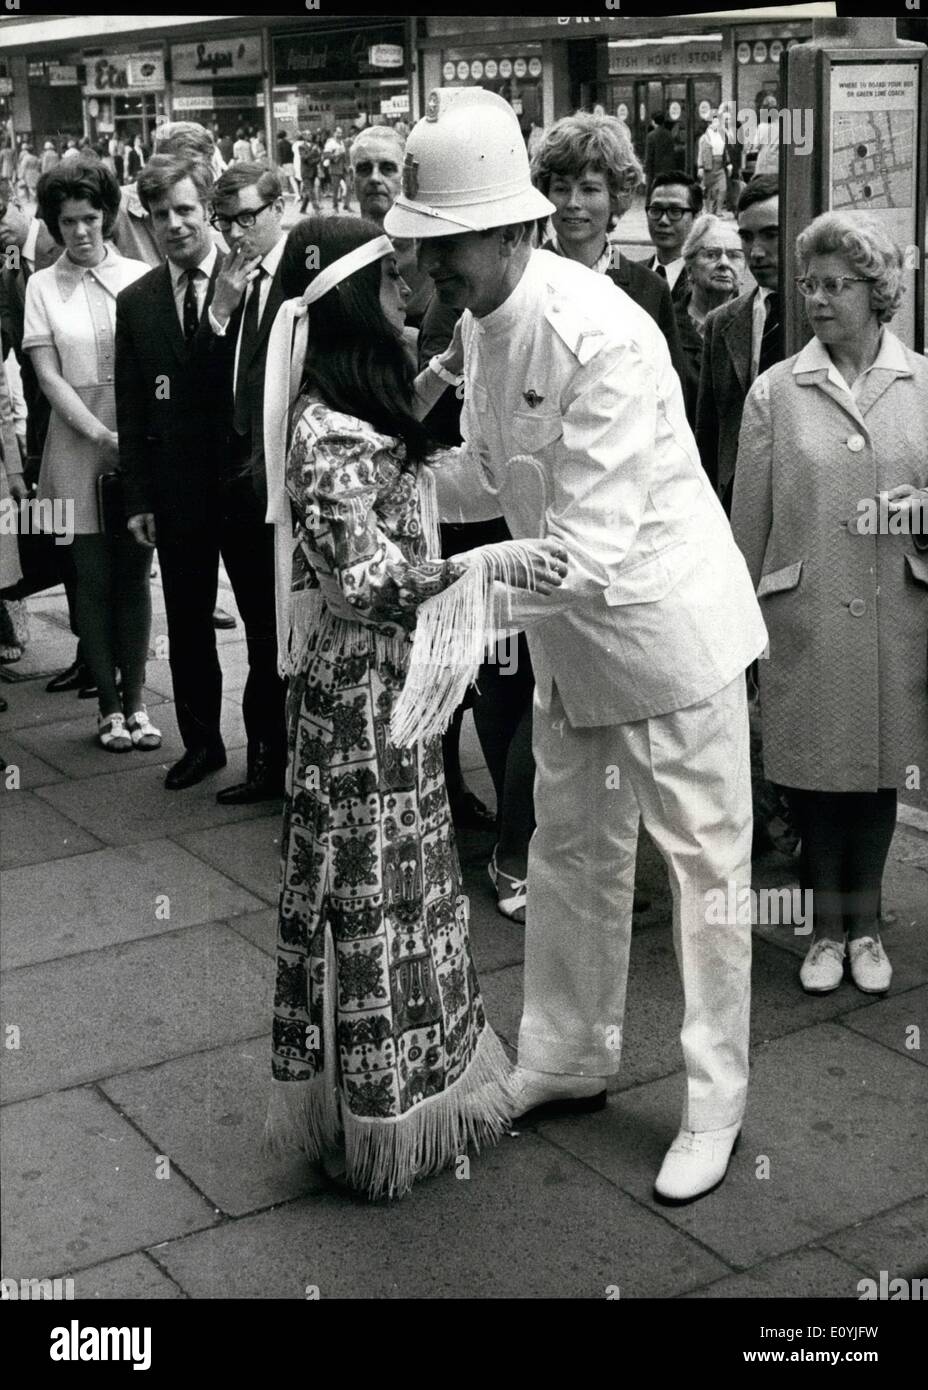 Jul. 07, 1970 - The dancing Policeman in London.: As part of the British European Airways ''Fly East'' programme a Yugoslavian Policeman is on a courtesy visit to London. He is one of the leading male dancers in the Belgrade Ballet Company. Standing 6ft 6in in his dress uniform (complete with pith helmet) he today realised an ambition to direct London's traffic ballet style Stock Photo